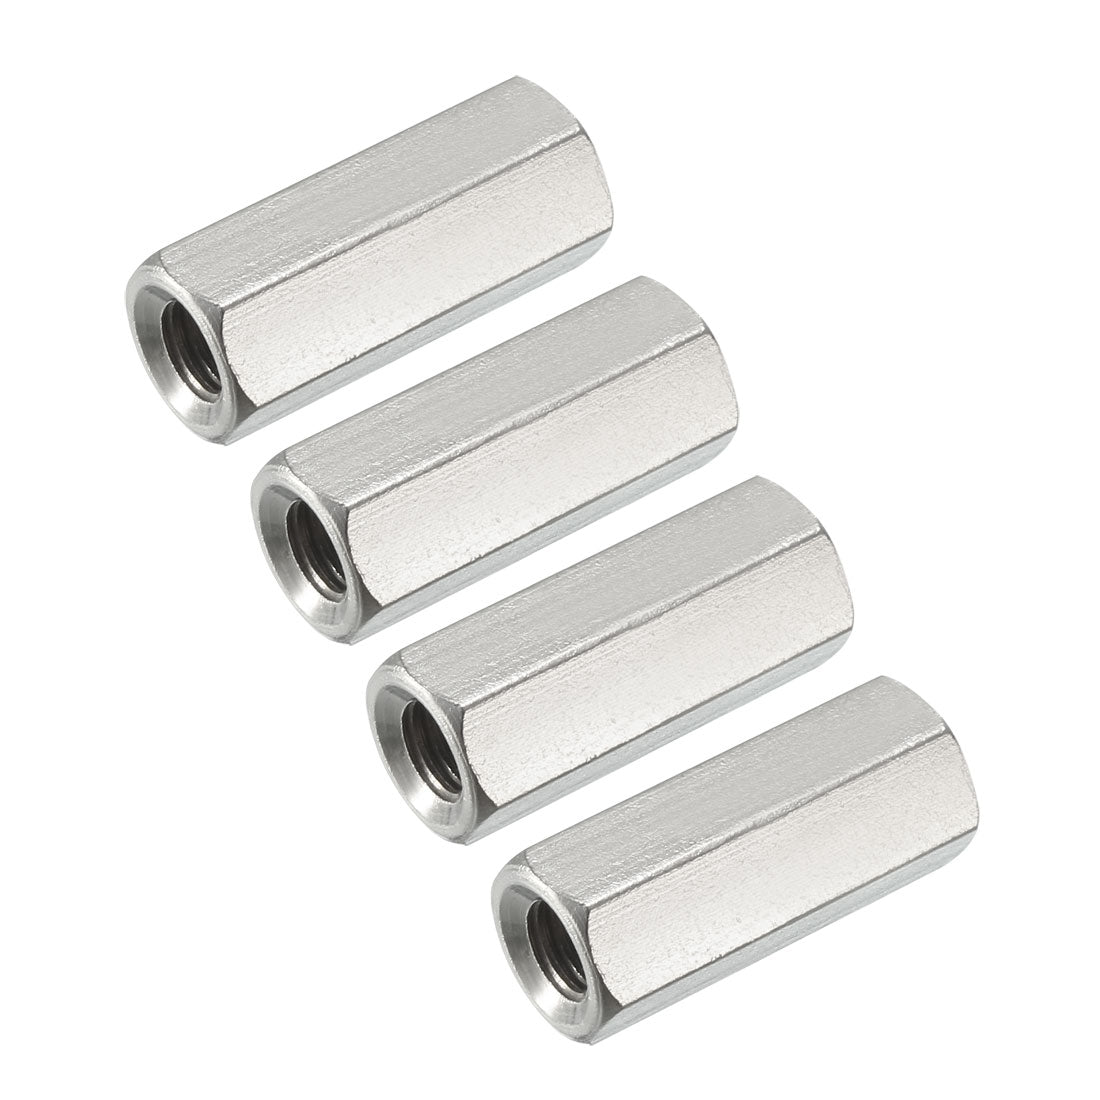 Uxcell Uxcell M6 x 1-Pitch 30mm Length 304 Stainless Steel Metric Hex Coupling Nut, 4Pcs